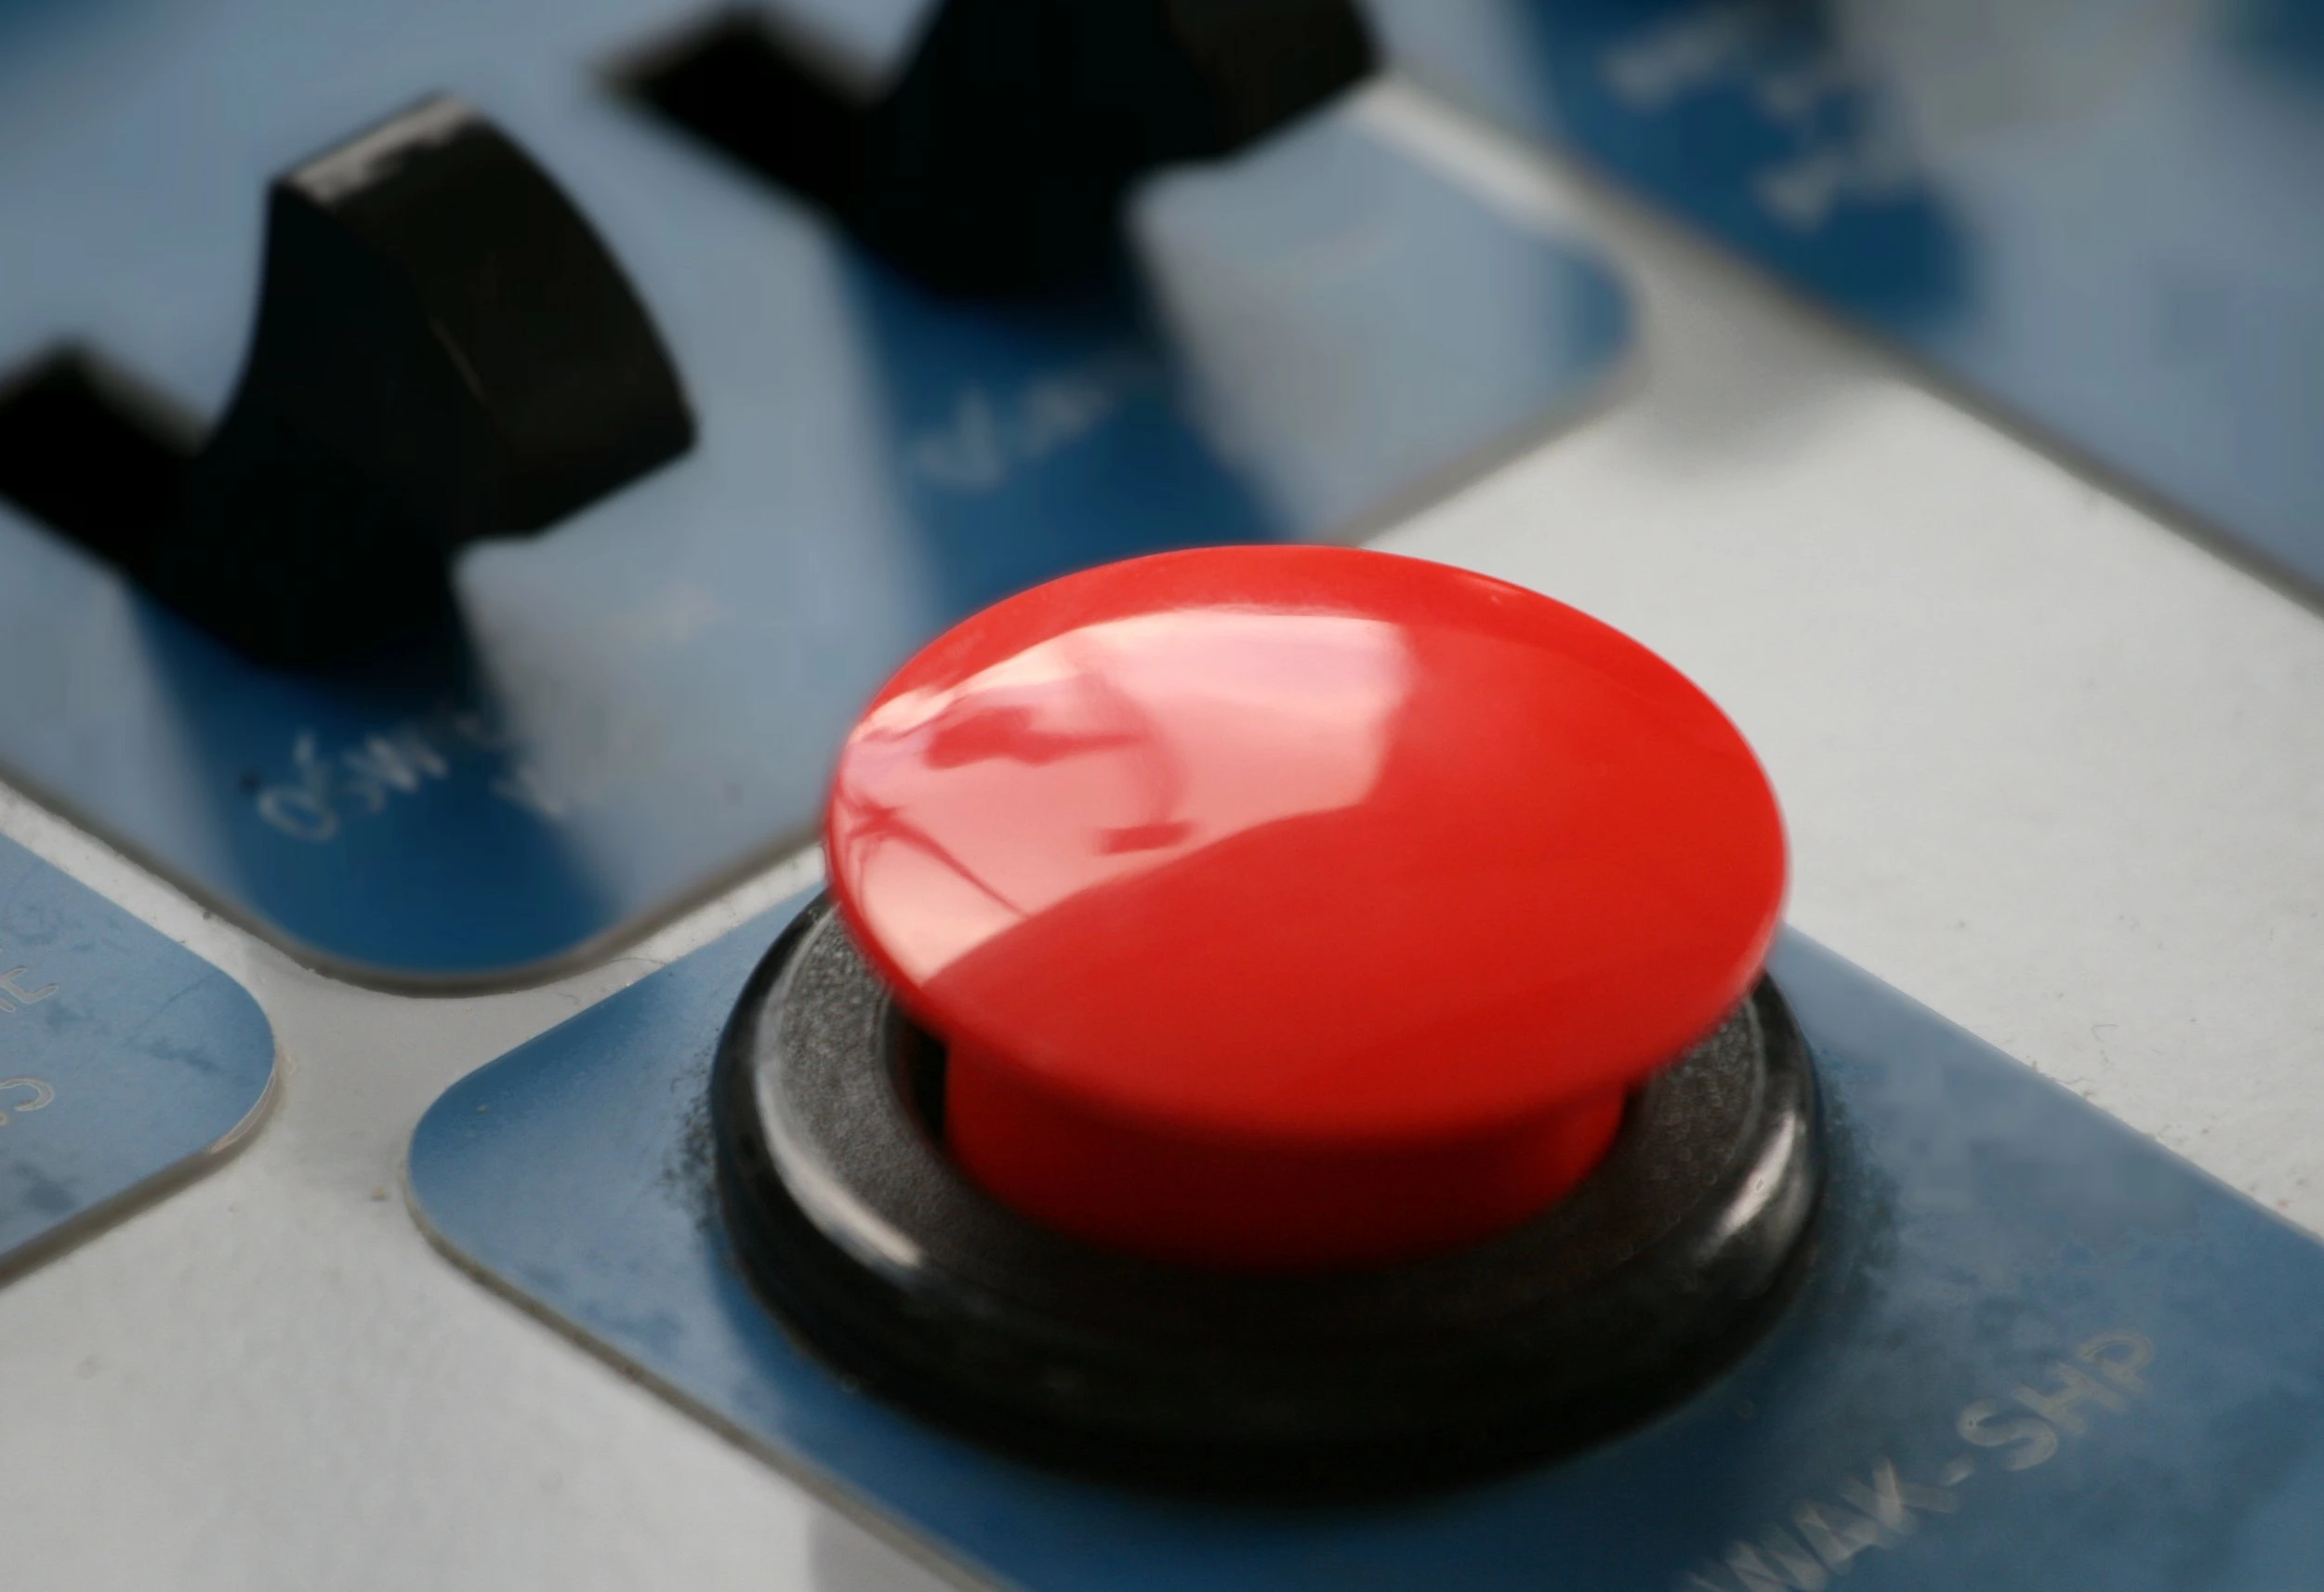 BRB- Be right back because you have to press the big red button.